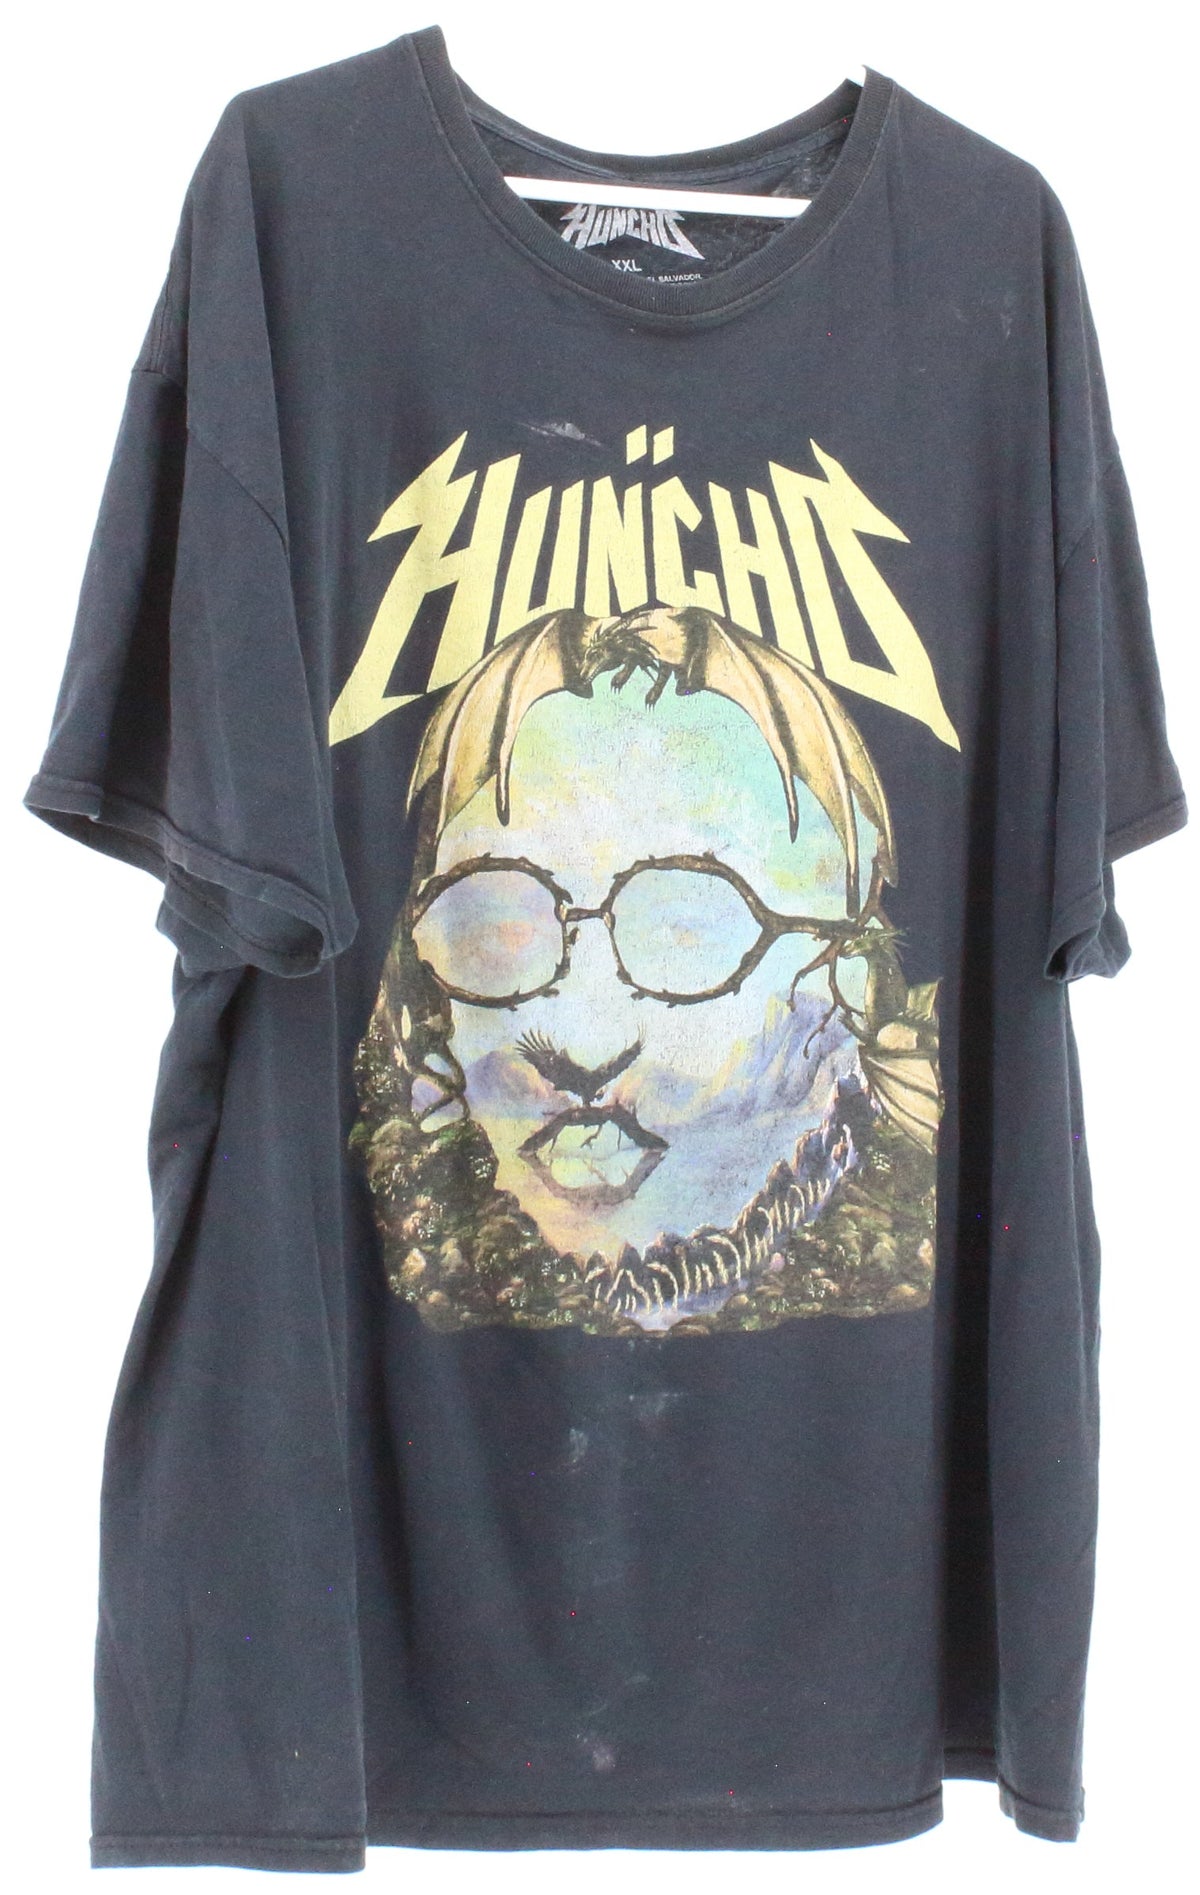 Huncho Black Front Graphic T-Shirt